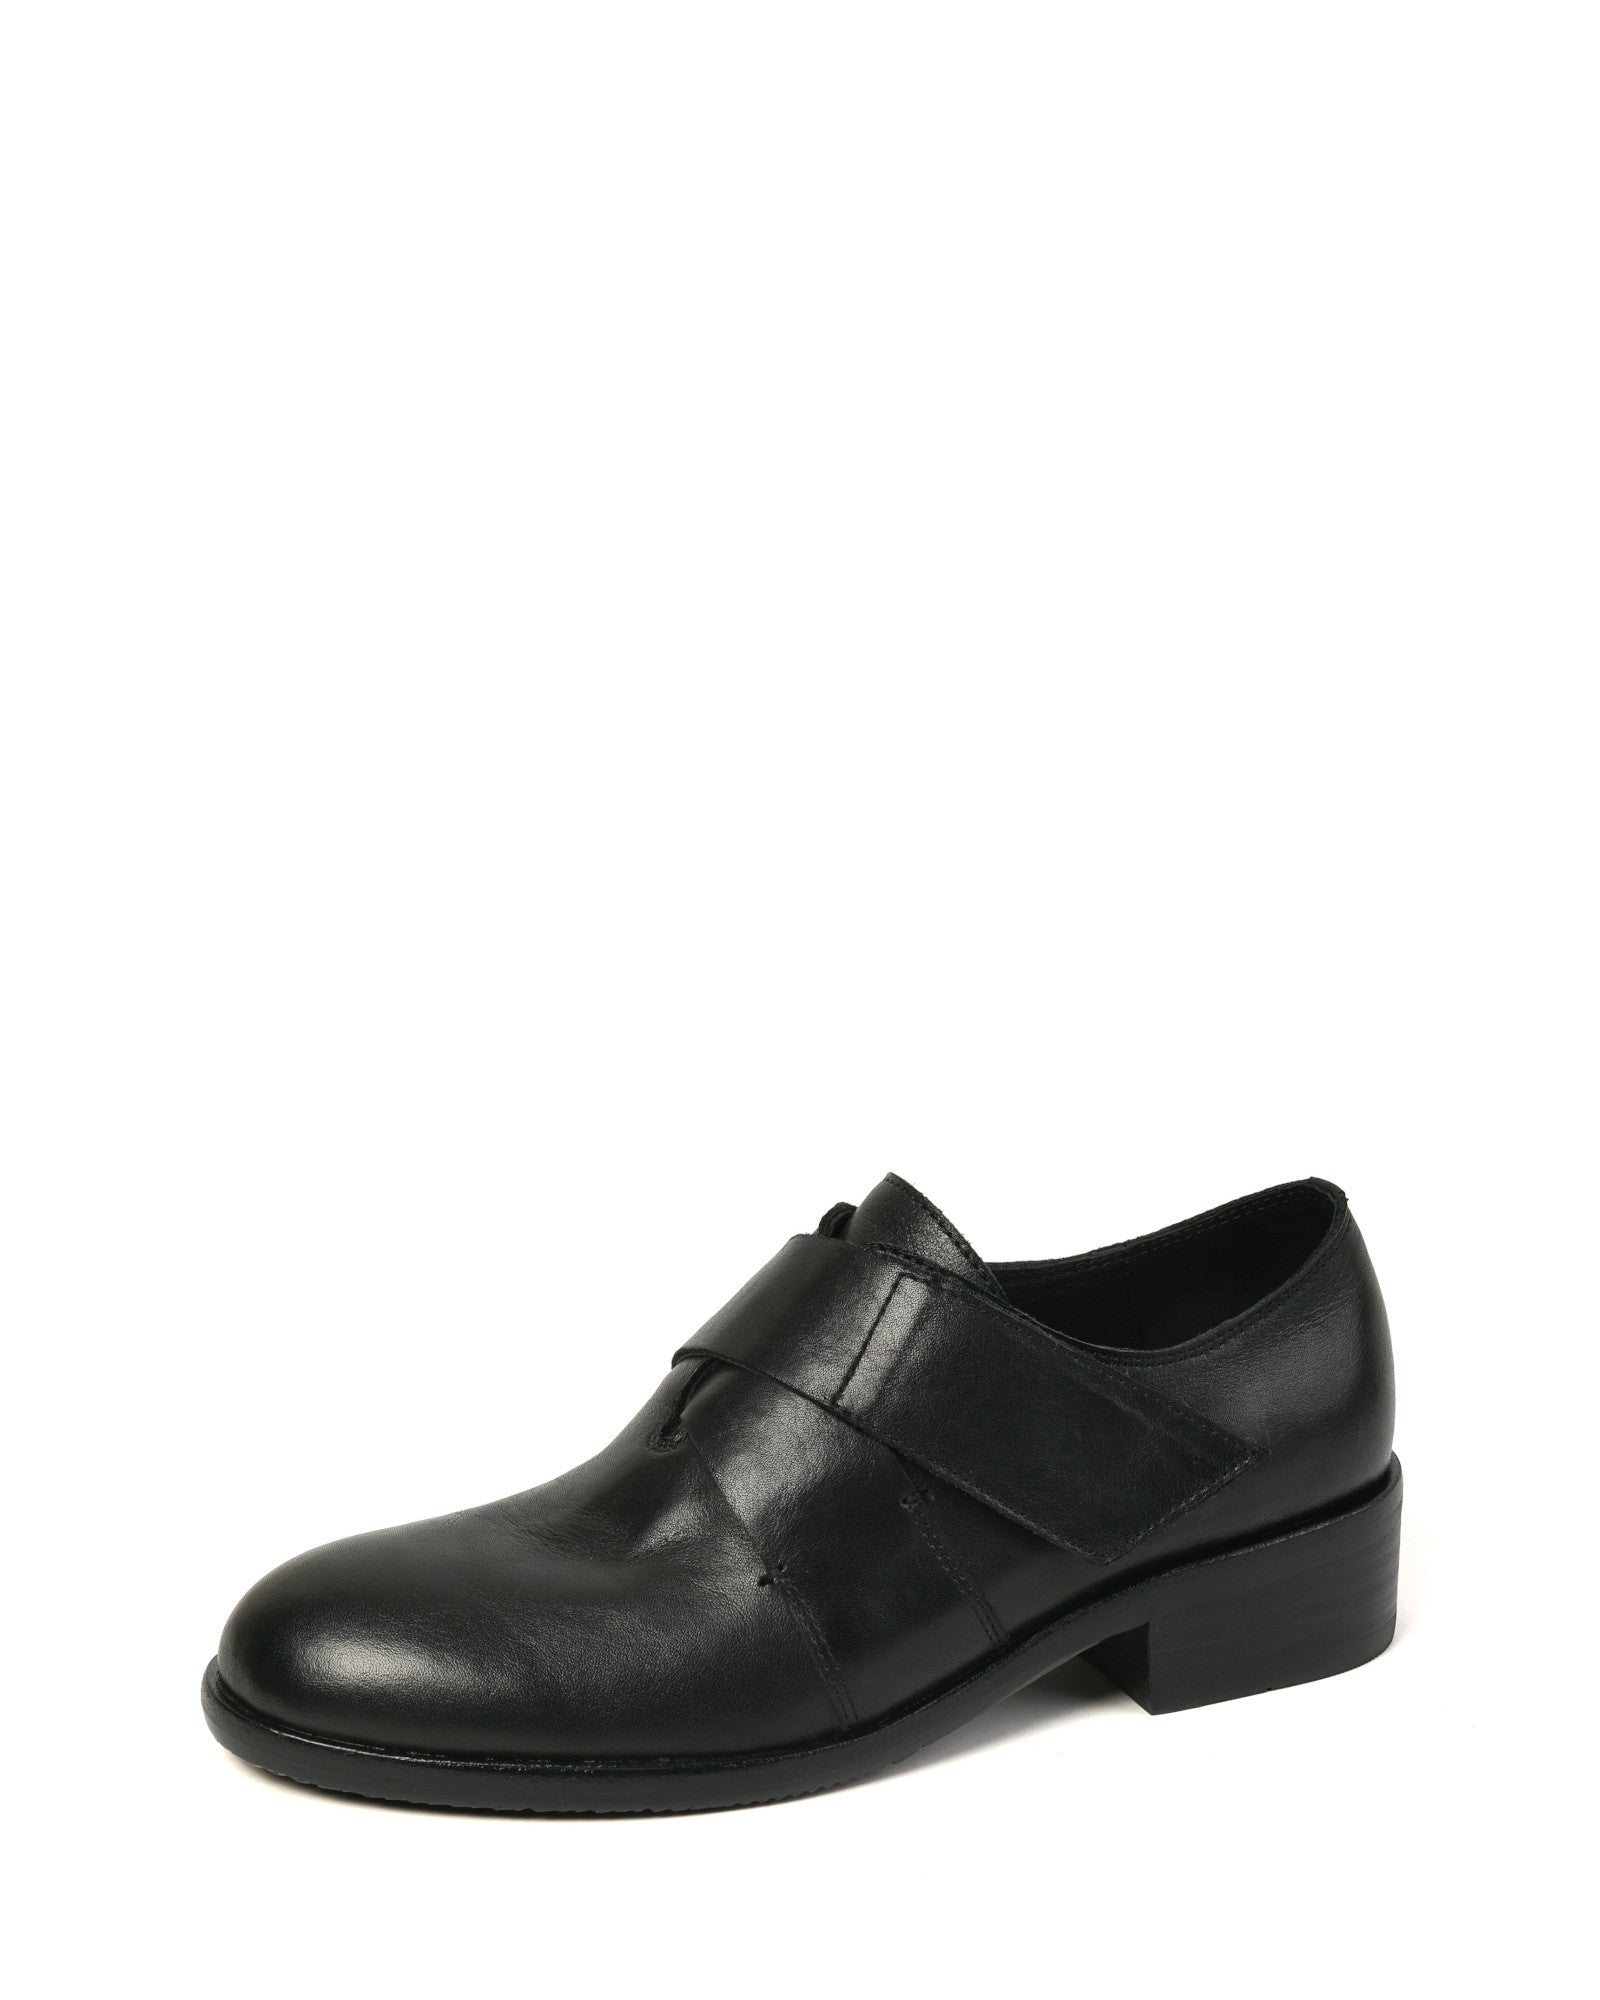 Ferio-black-leather-loafers